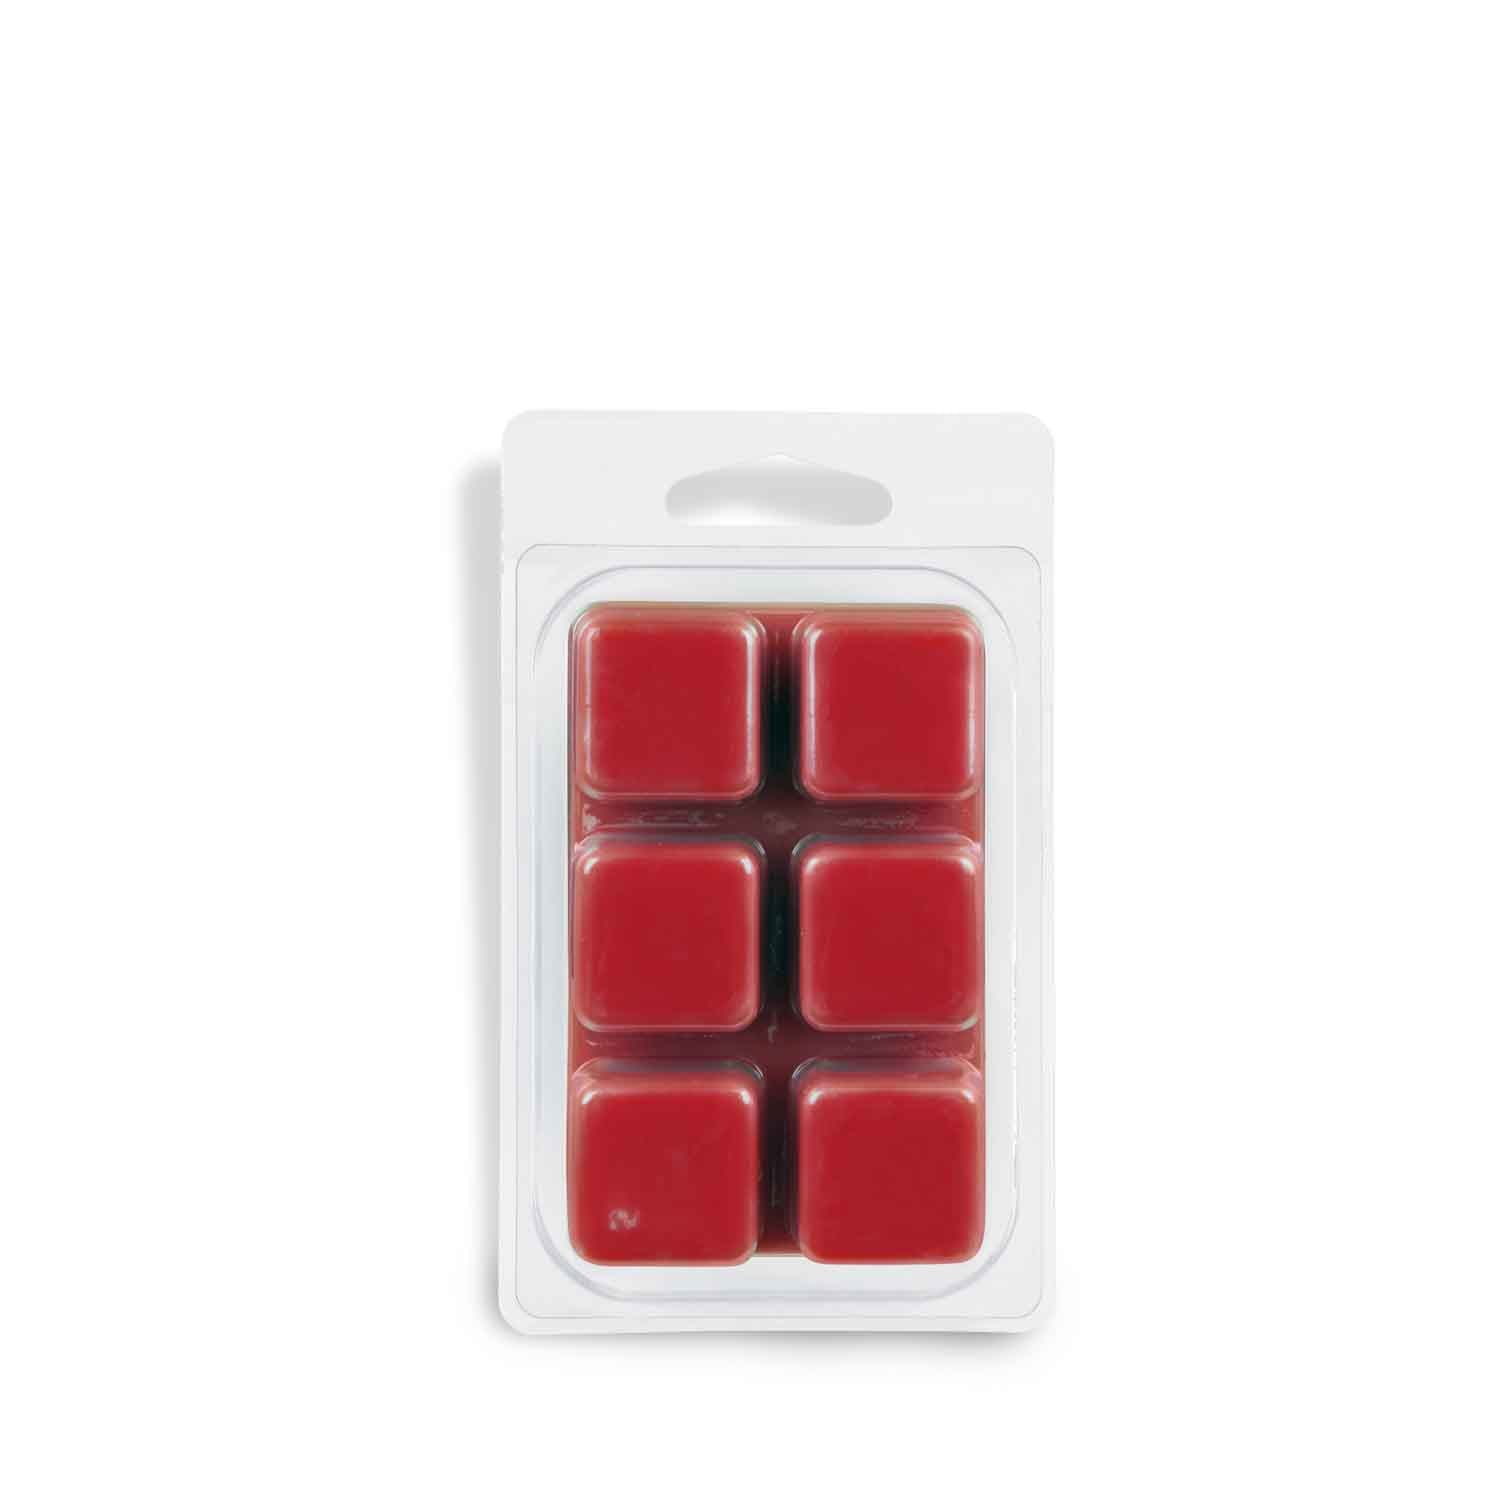 A pack of McIntosh Apple Scented Wax Melt (2.5 oz) cubes by Tuscany Candle for fragrance on a white background.